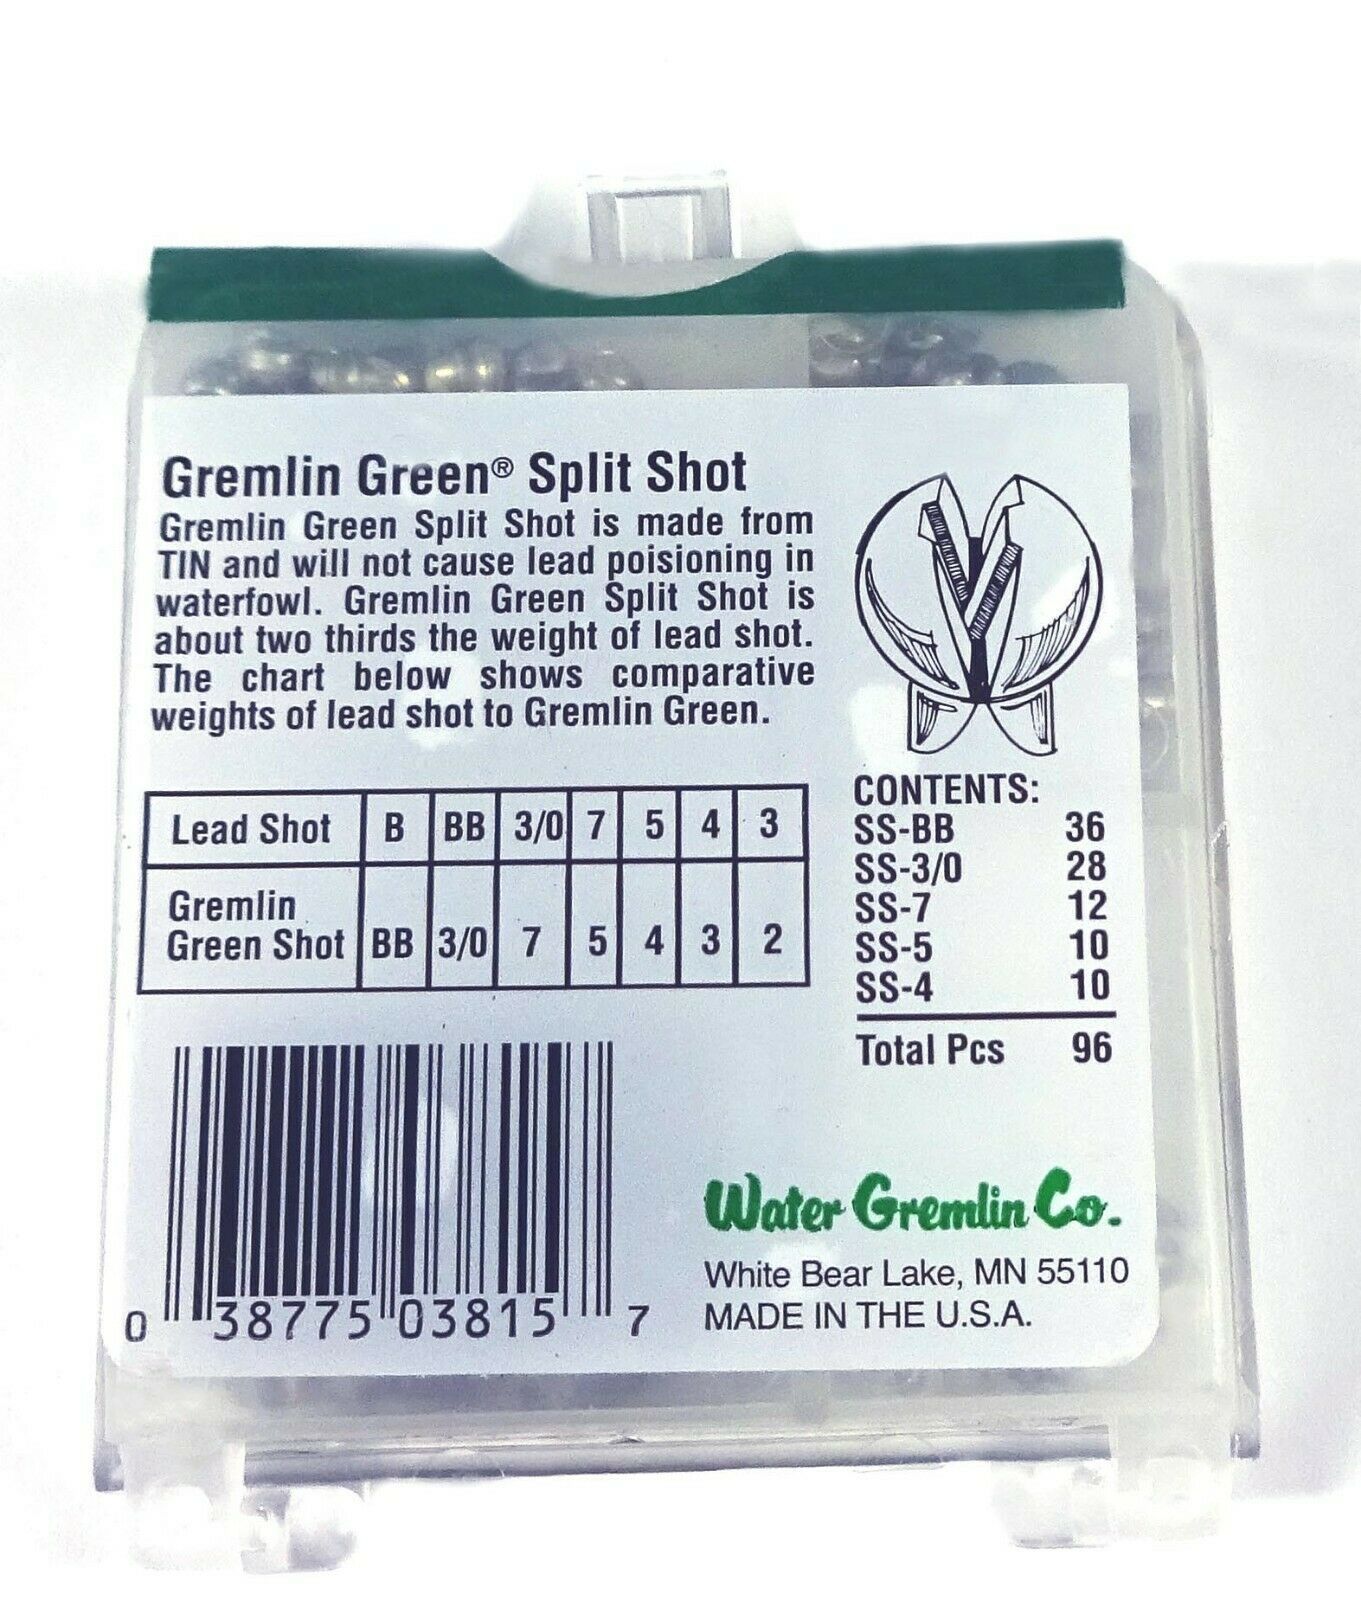 Water Gremlin Announces Gremlin Green™ Program with Plans to Double  Solvent-Free Coating Capabilities by 2025